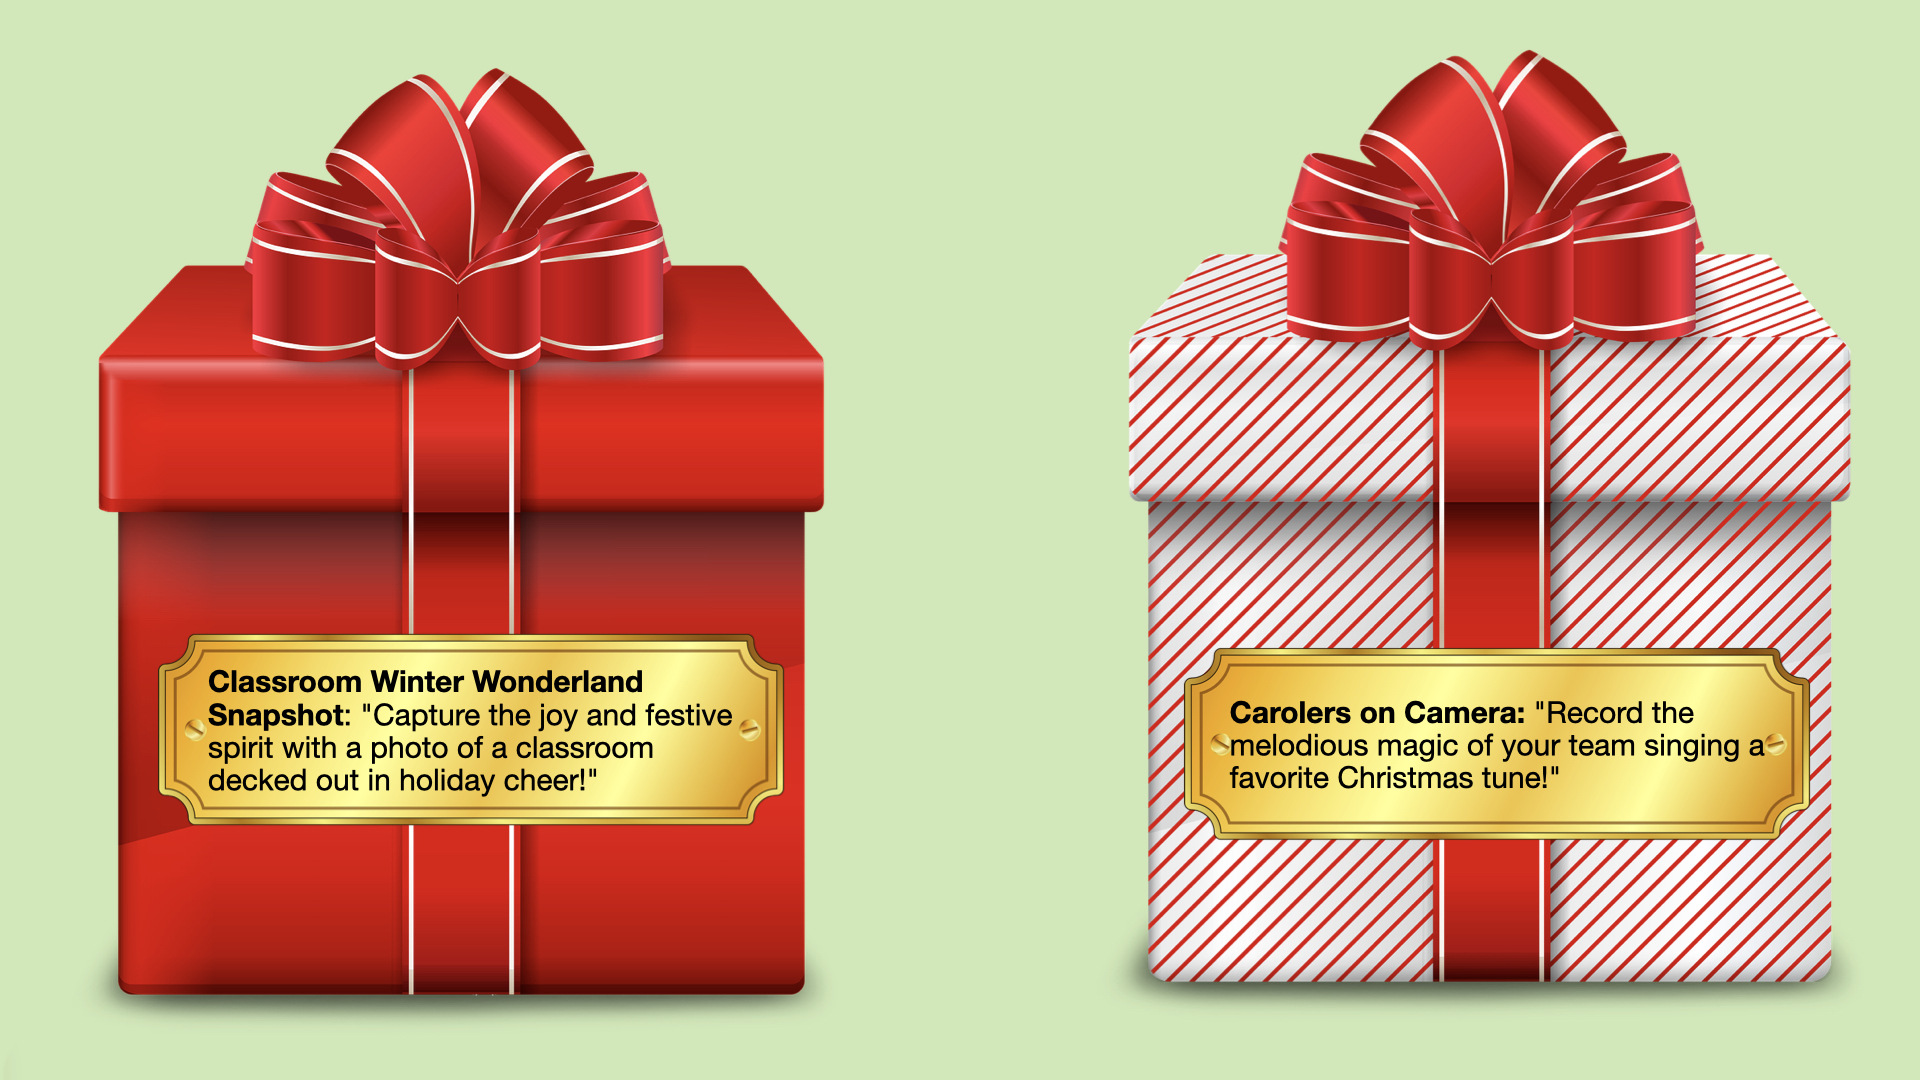 Two illustrated gift tags with challenges: "Classroom Winter Wonderland Snapshot" and "Carolers on Camera."